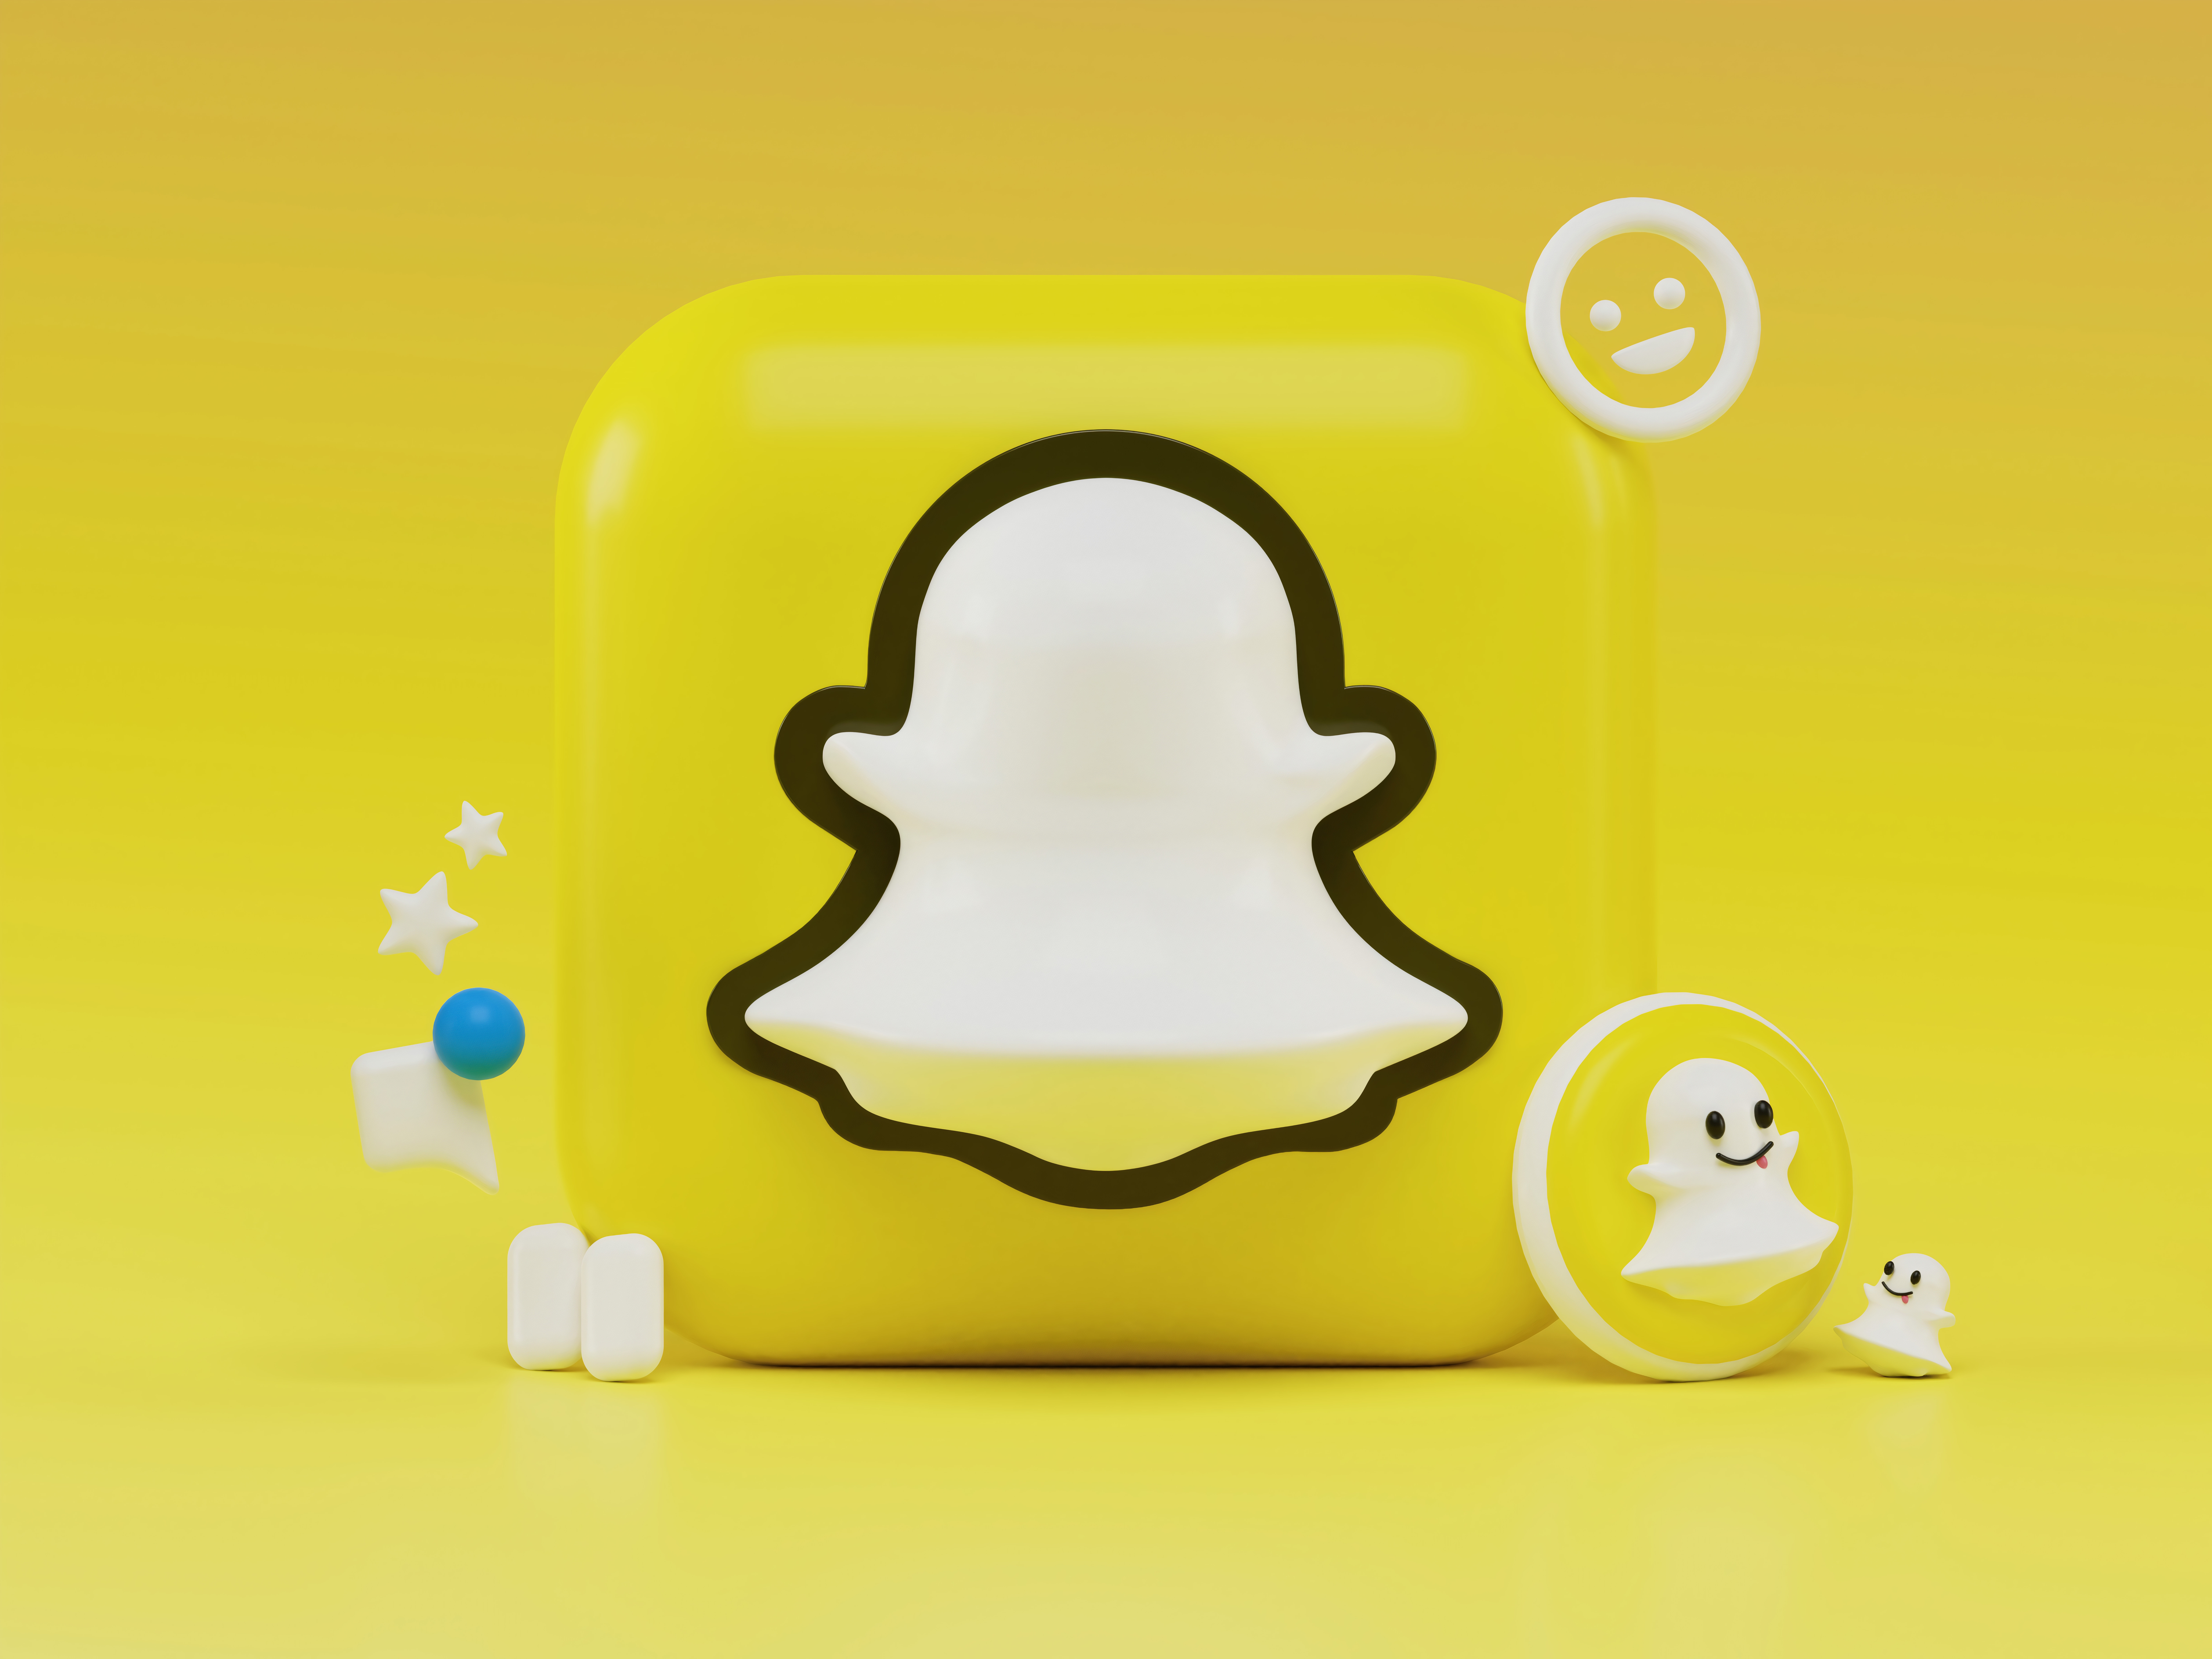 Snap Inc. Offers New Innovative Solutions for Advertisers with First Story Ads